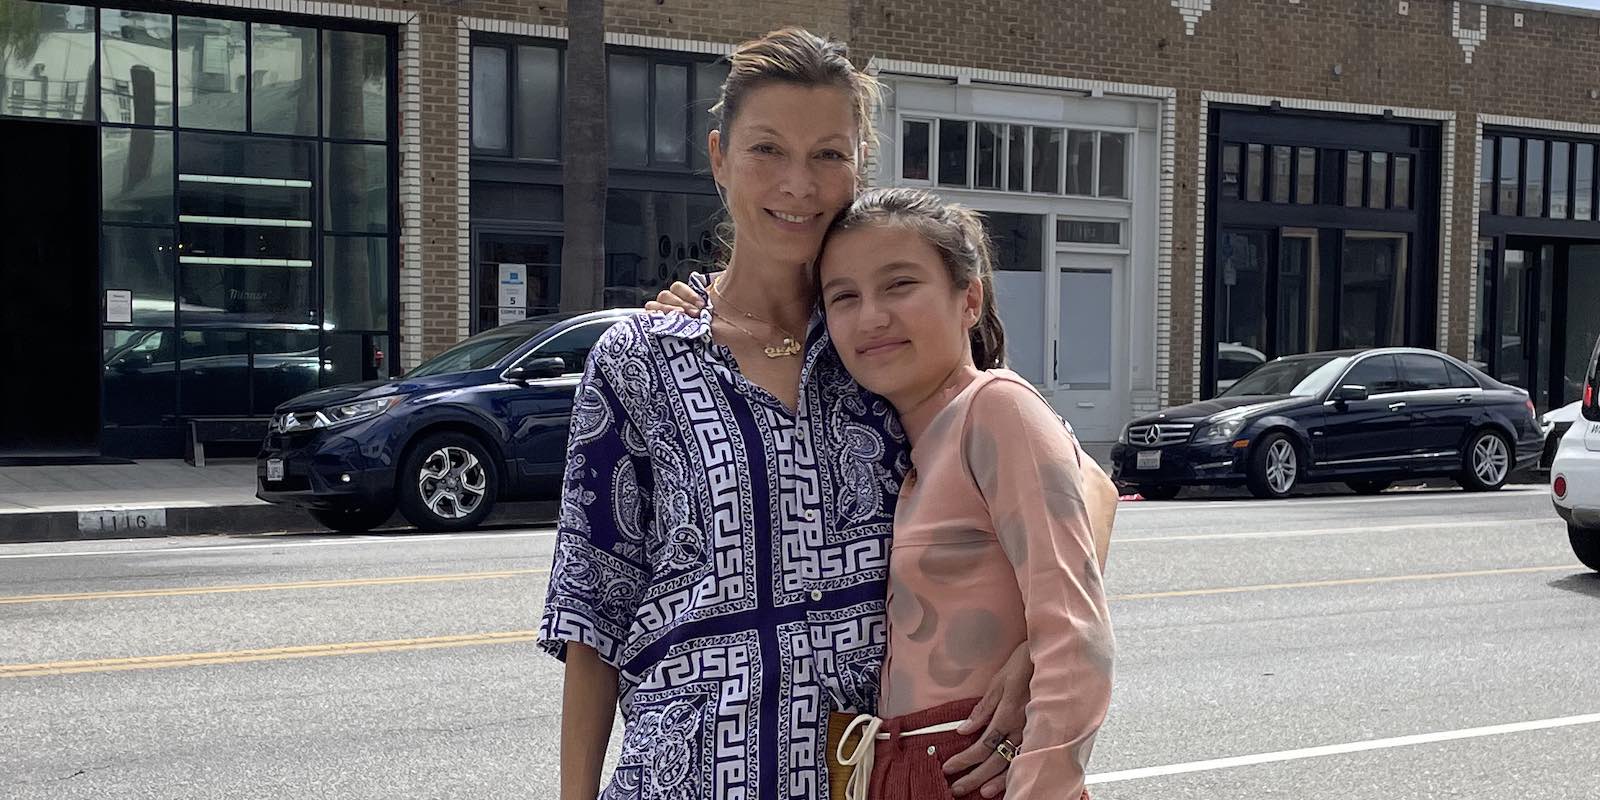 Mother and daughter stand roadside, wearing a navy blue and white printed button up shirt and pink and grey printed turtleneck top.